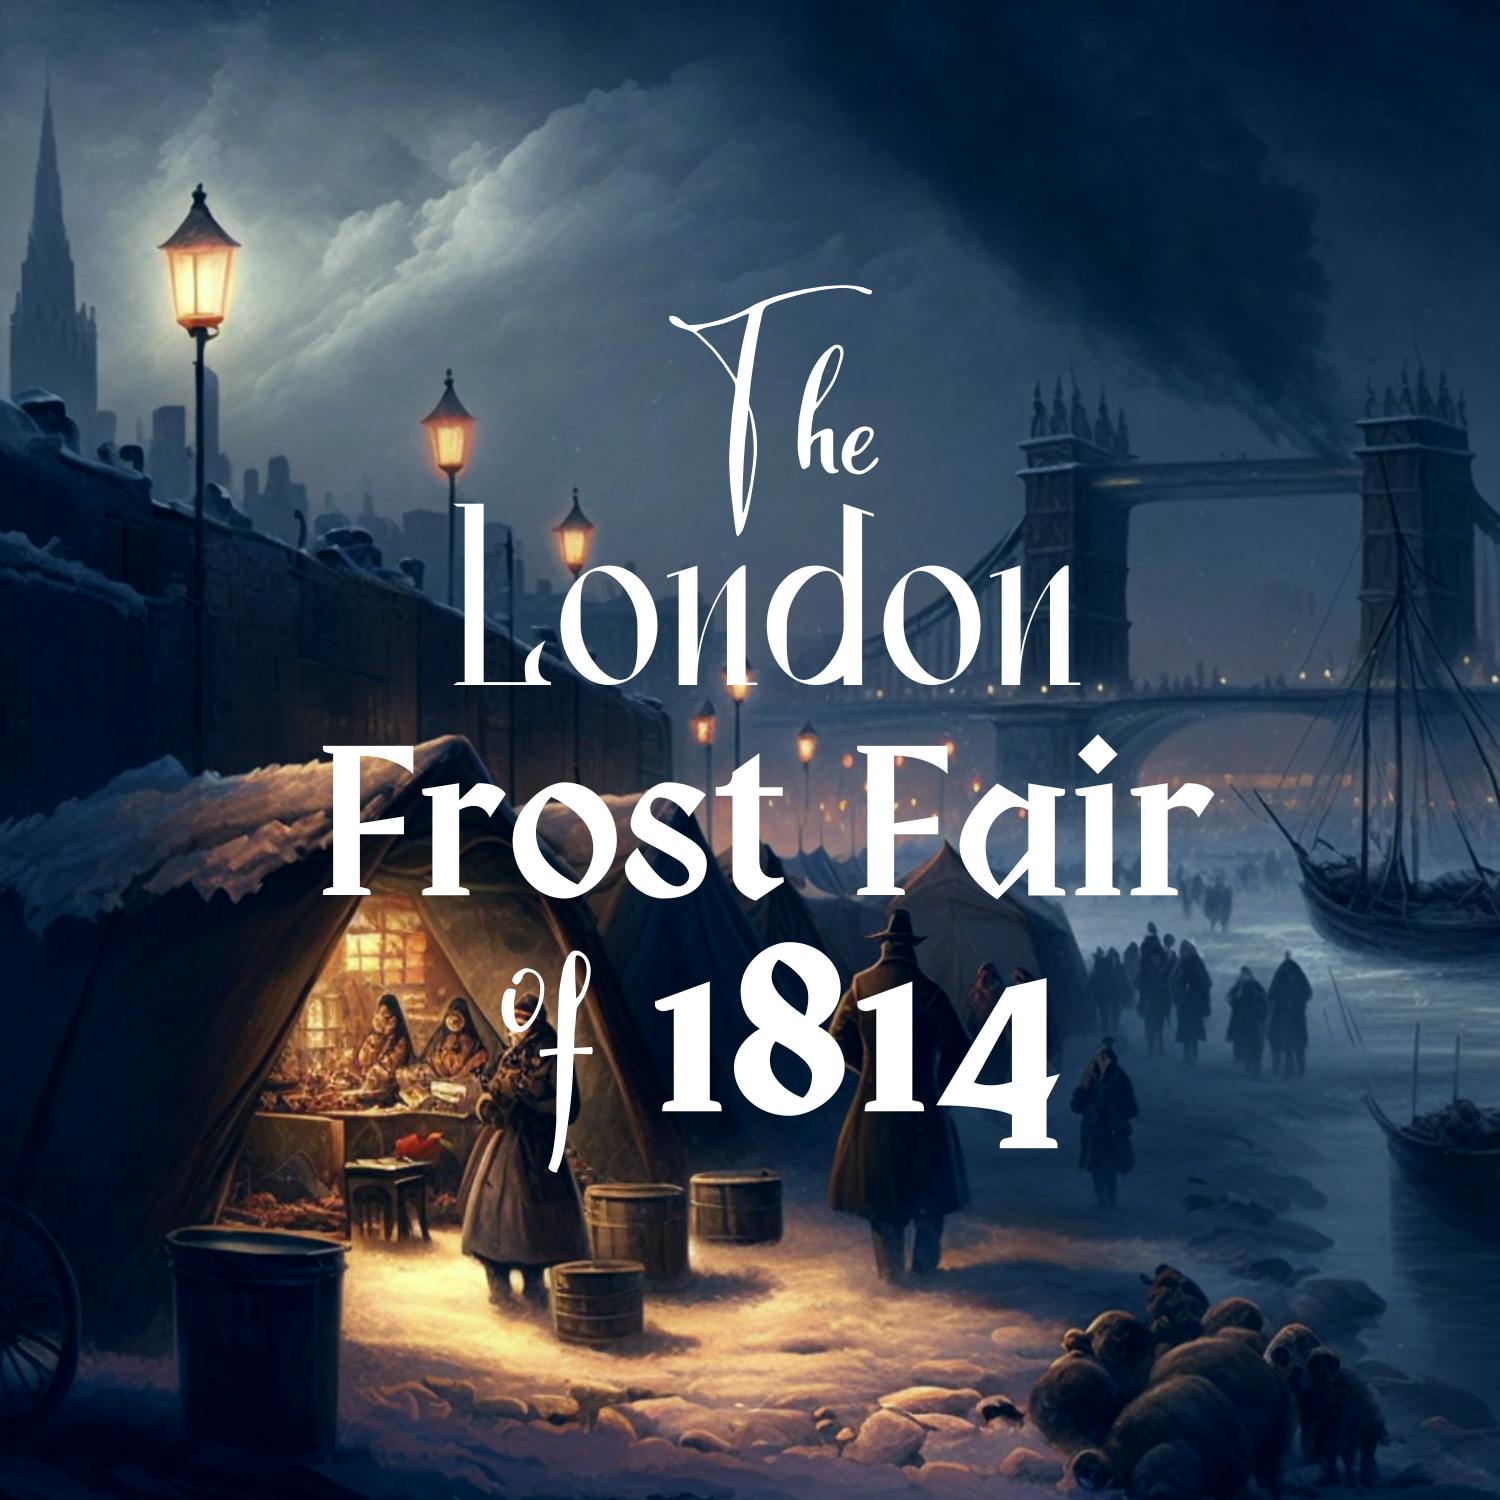 The London Frost Fair of 1814